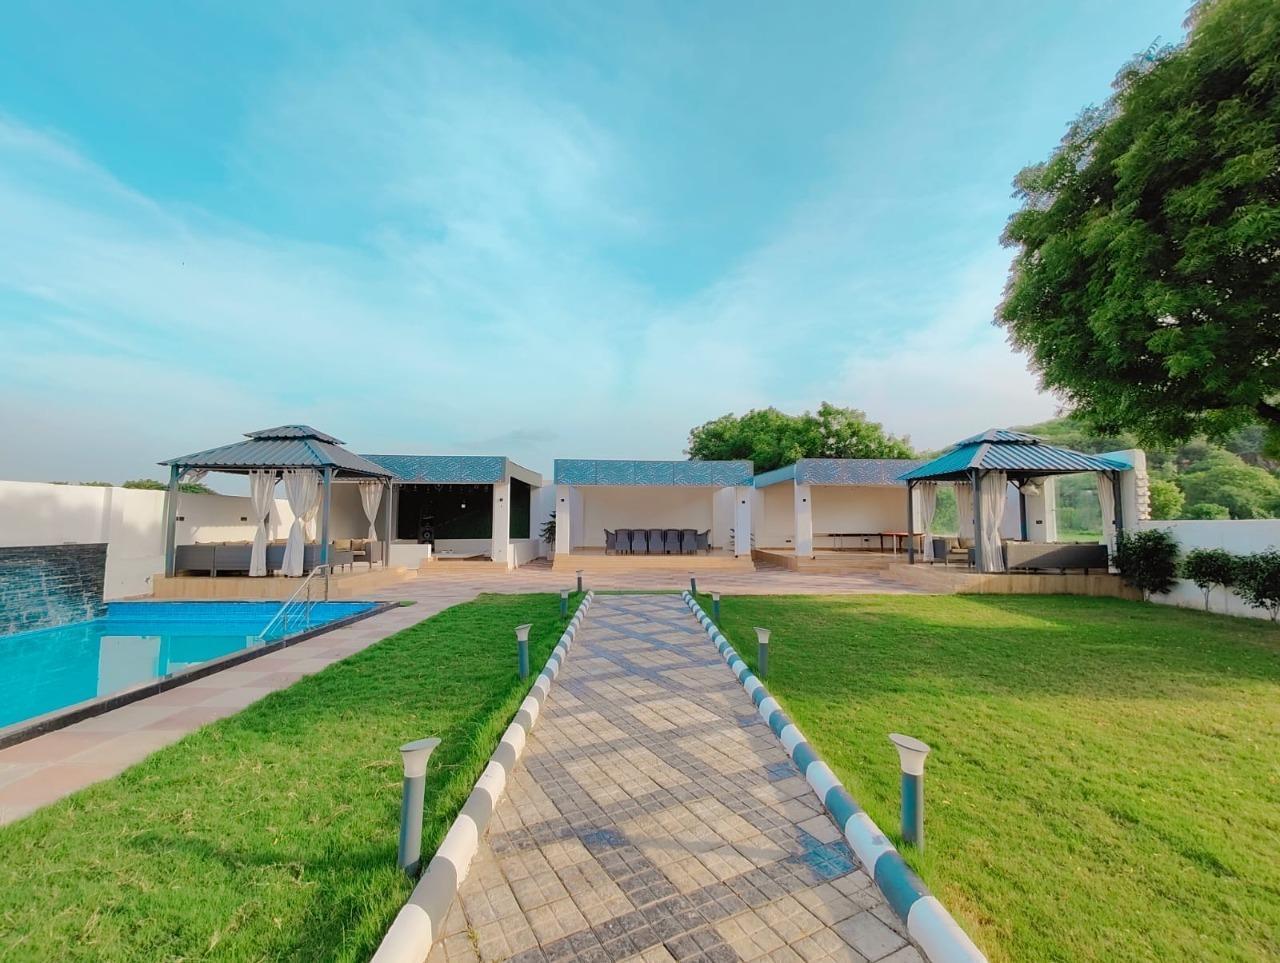 Farmhouse for Rent in Gurgaon - Affordable Wedding Venues